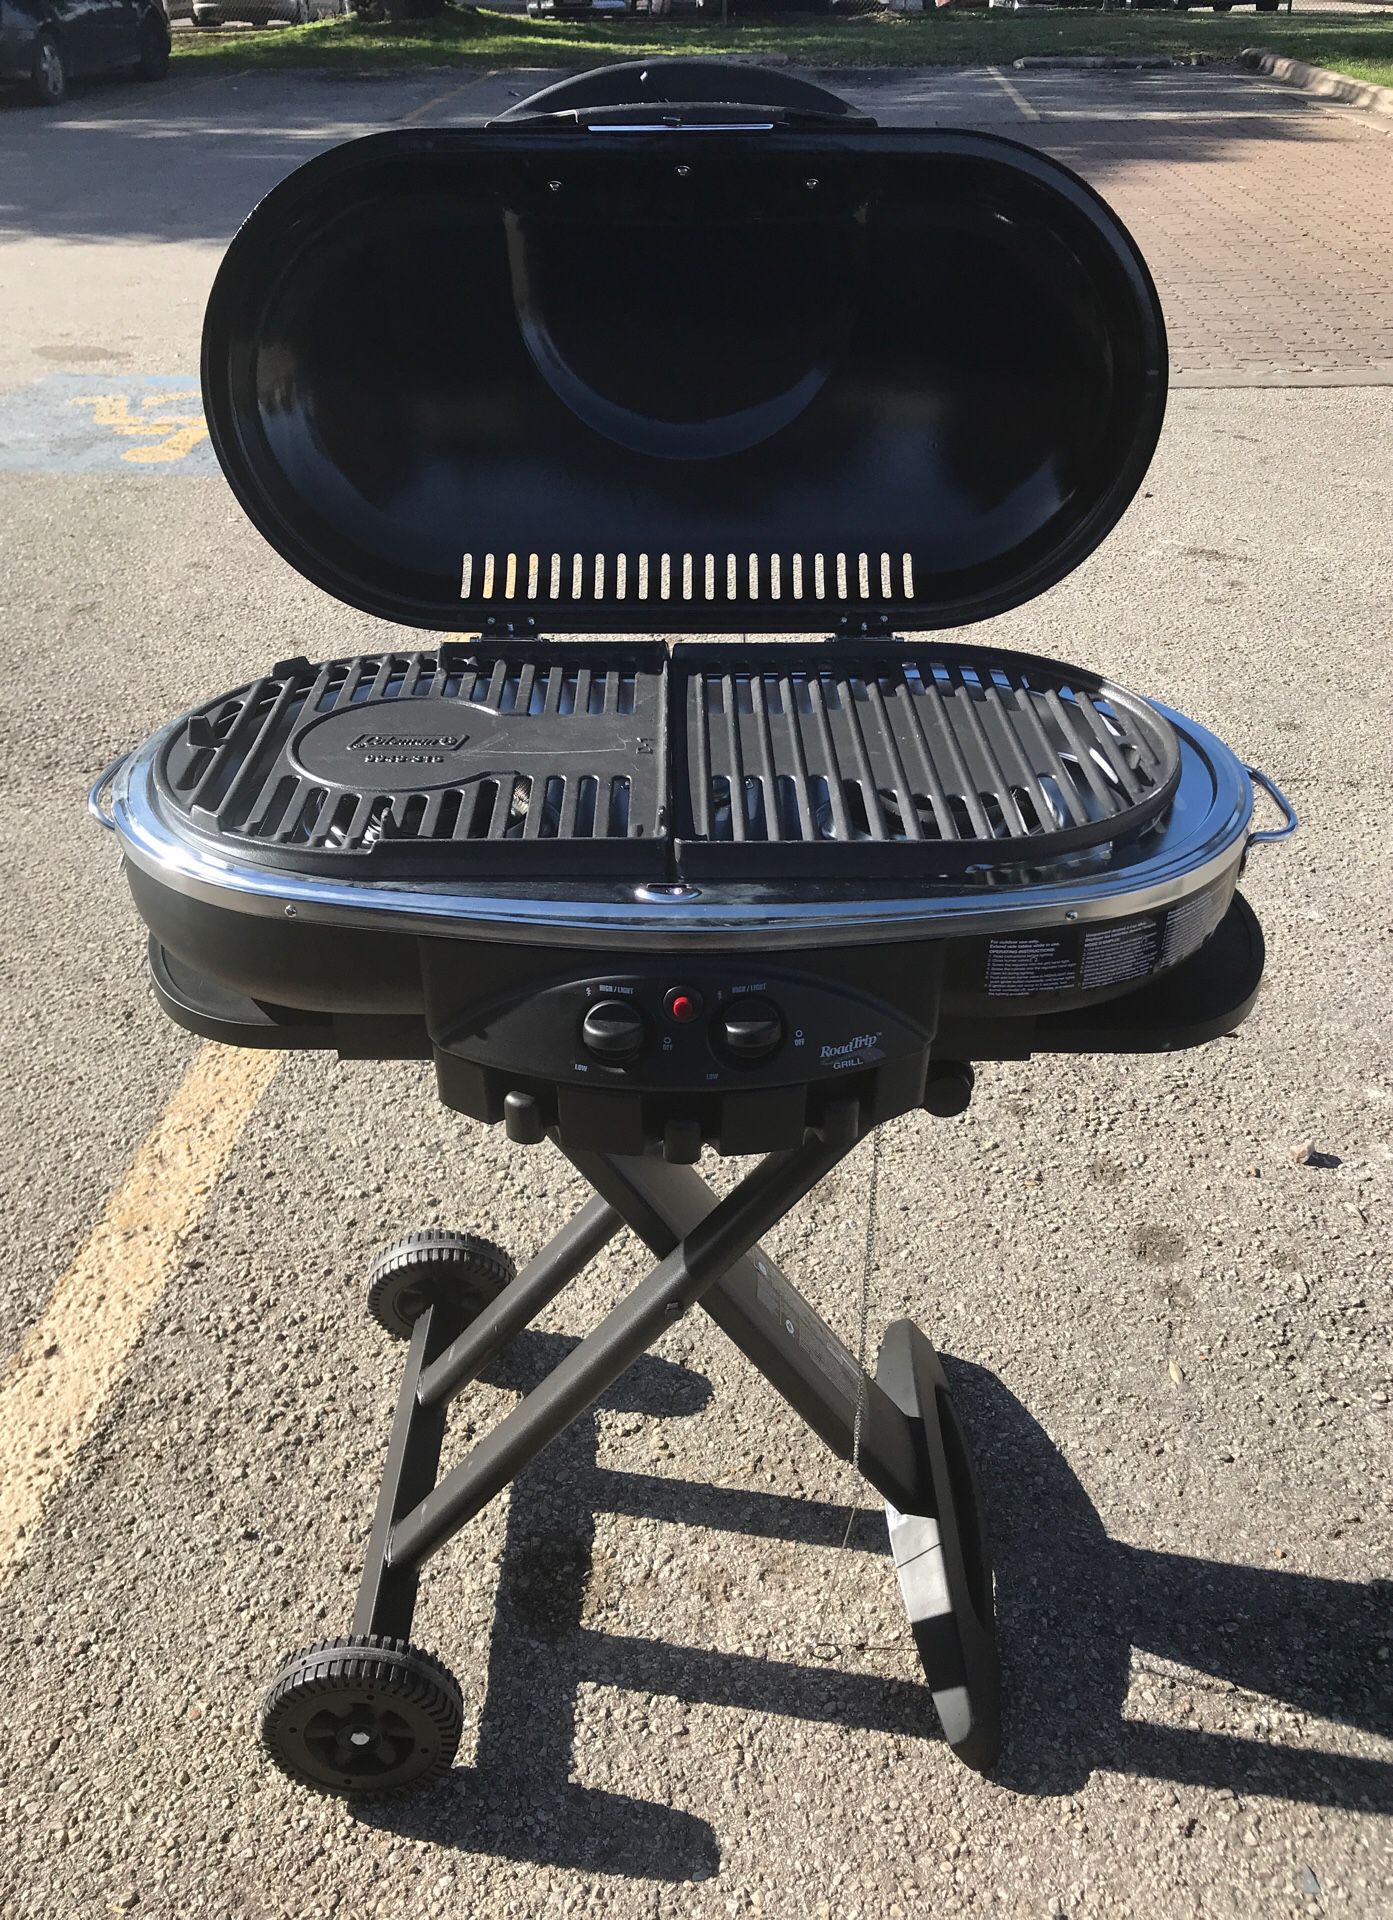 Coleman Roadtrip Propane BBQ Grill 2 burners 10,000 BTU EACH rolling/stand light wight new condition all black